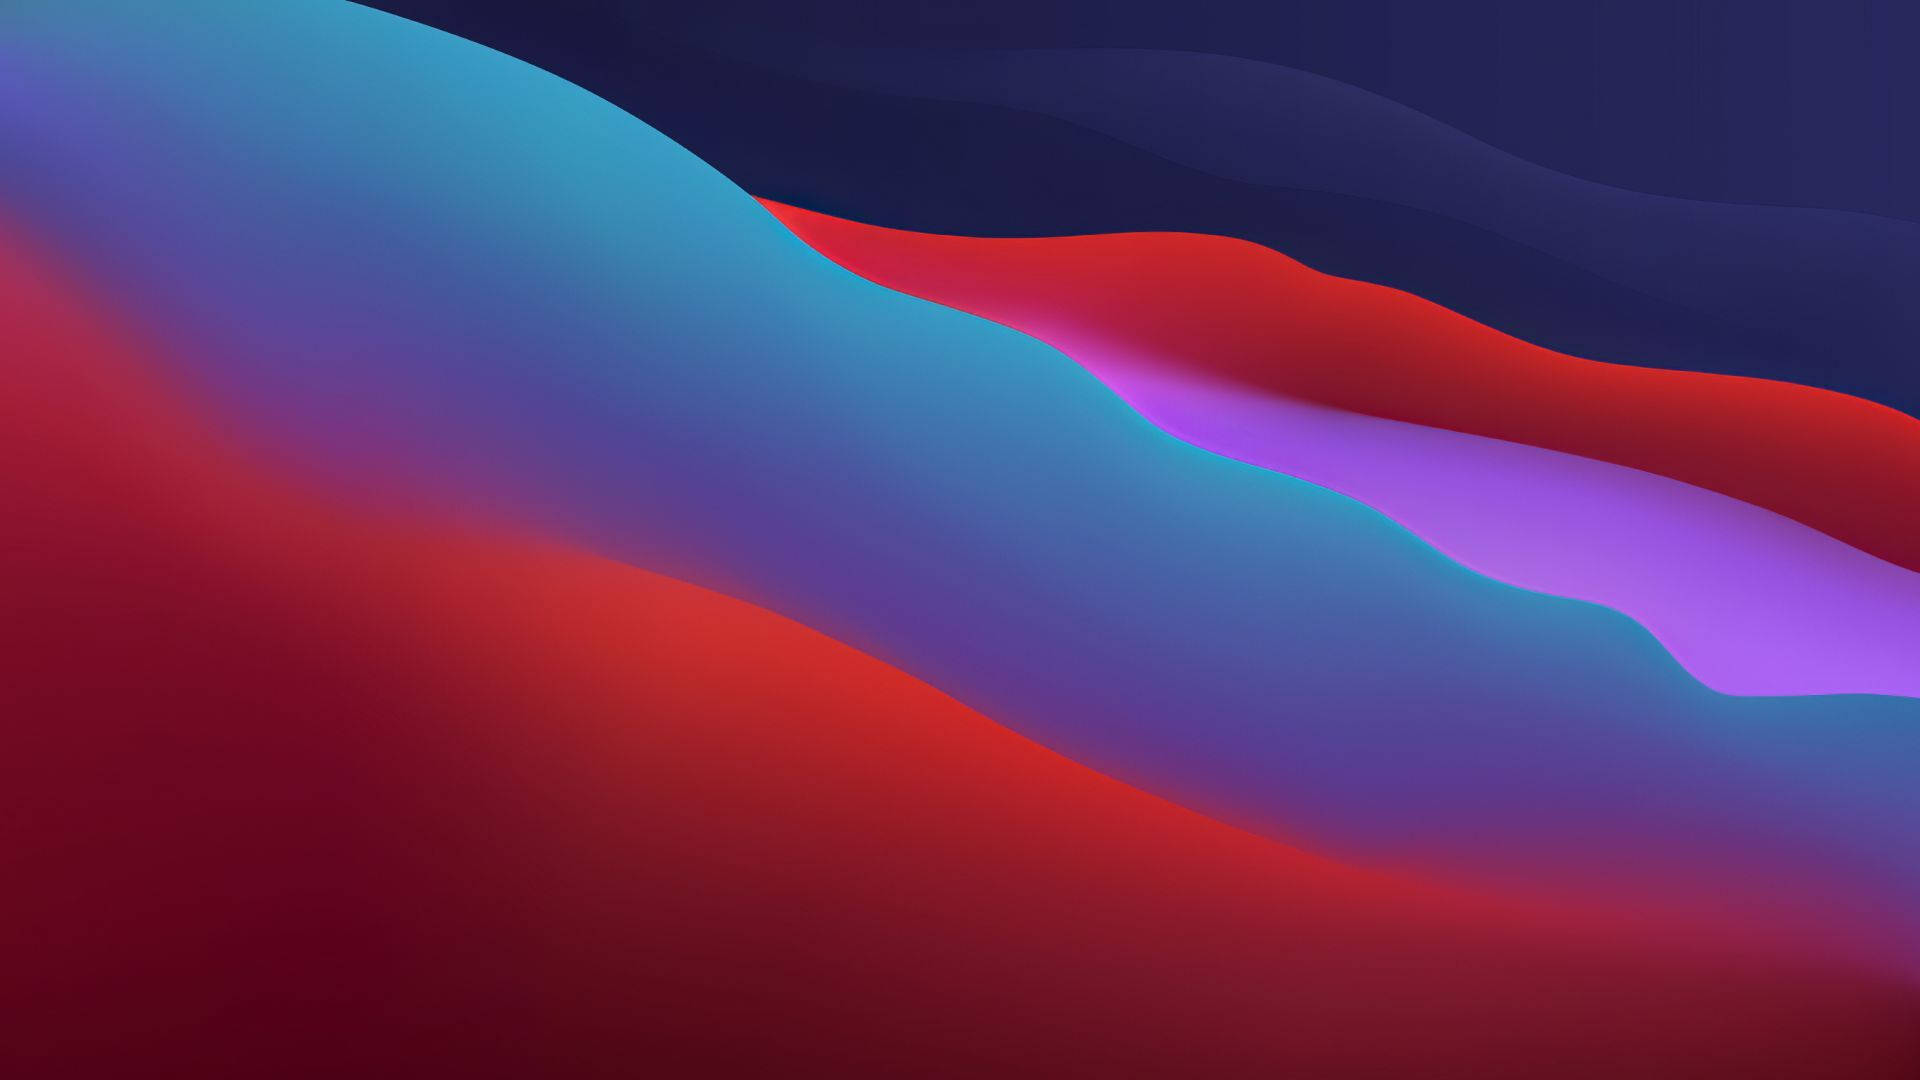 Macos Big Sur Red And Blue Waves Background